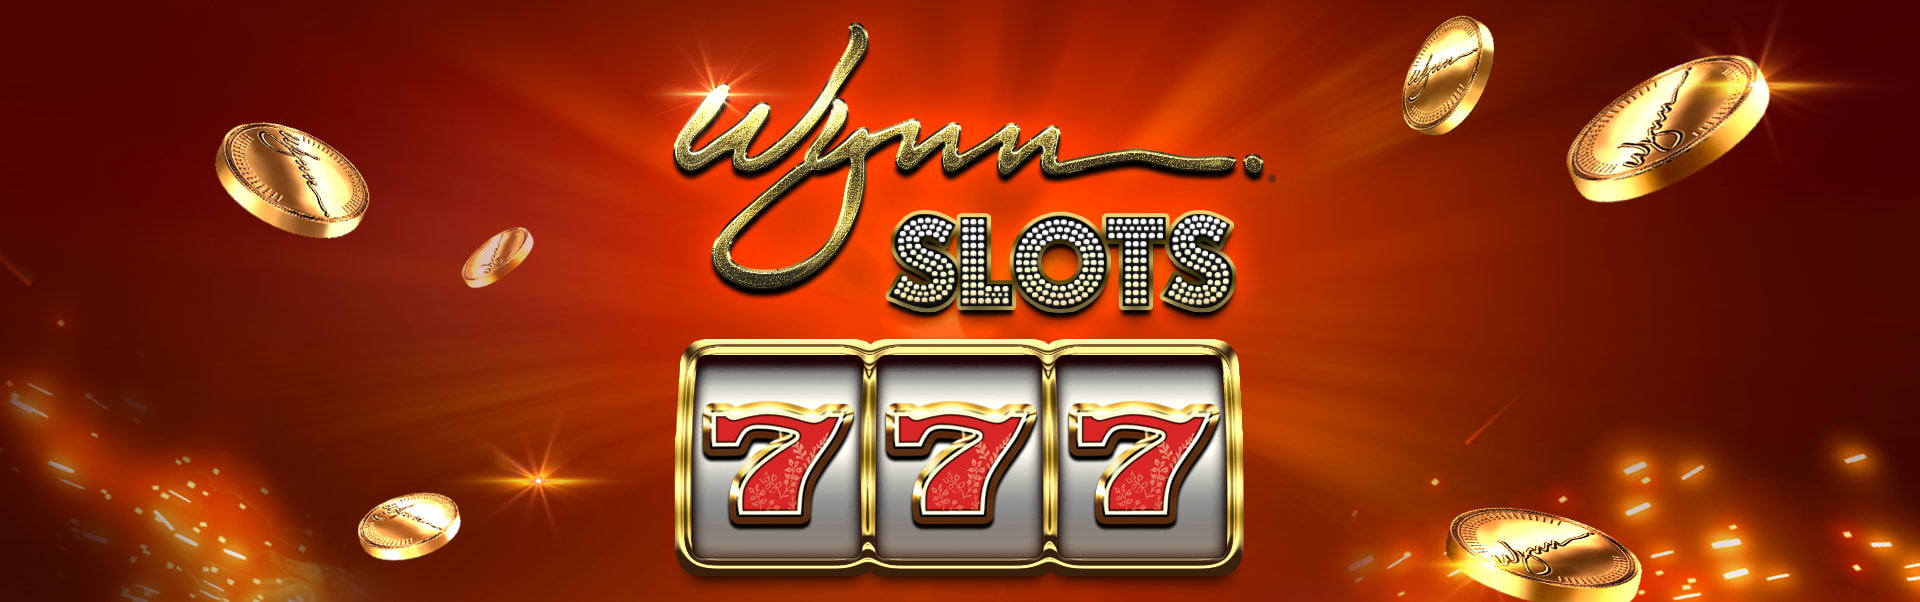 Wynn slots best game for free games download